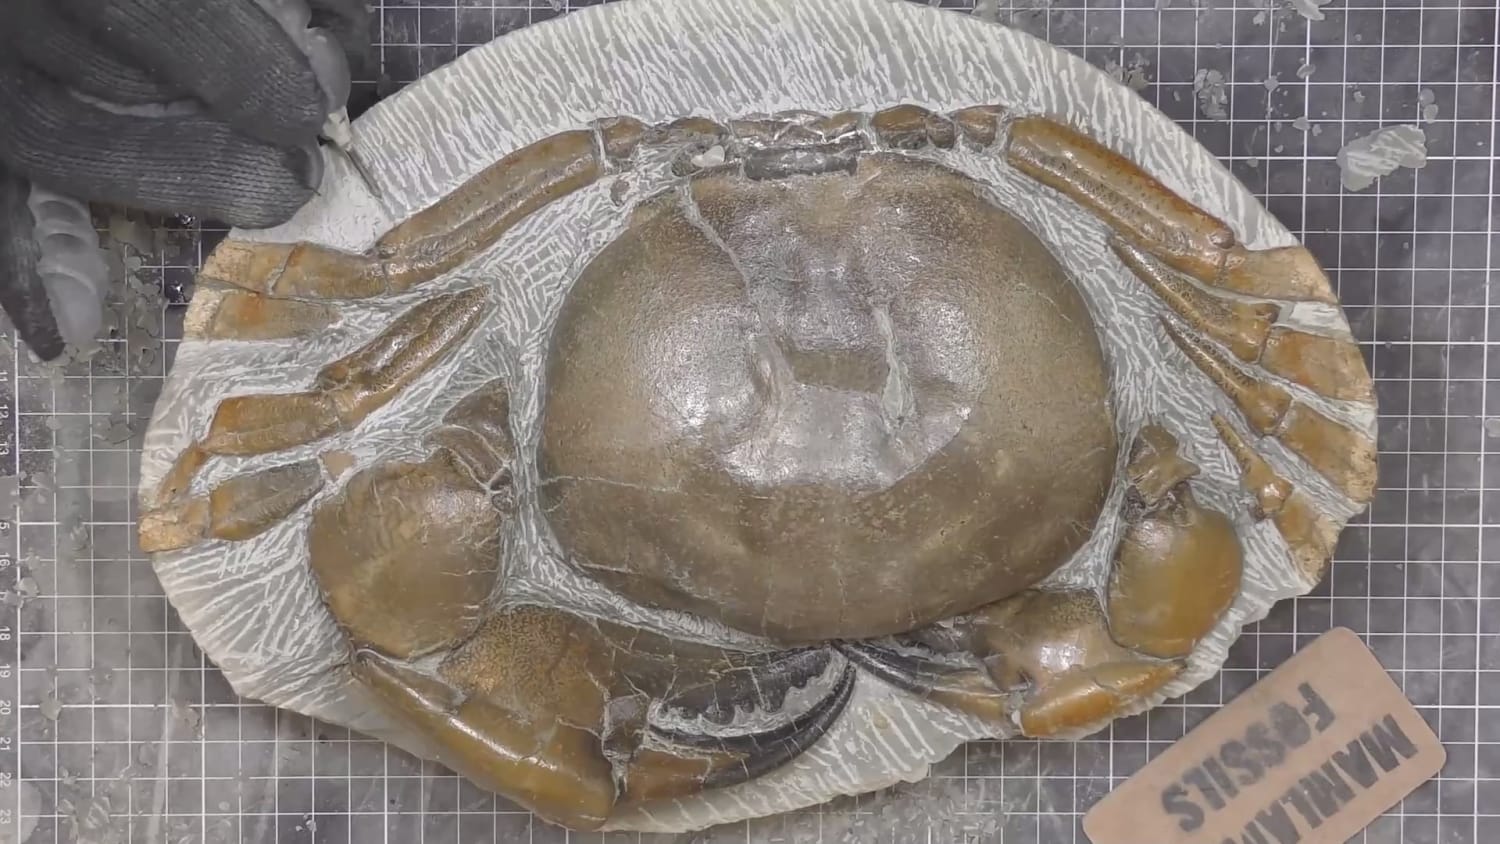 Removing the rock from a fossil crab - it took 208 hours. The crab is around 12-million-years-old